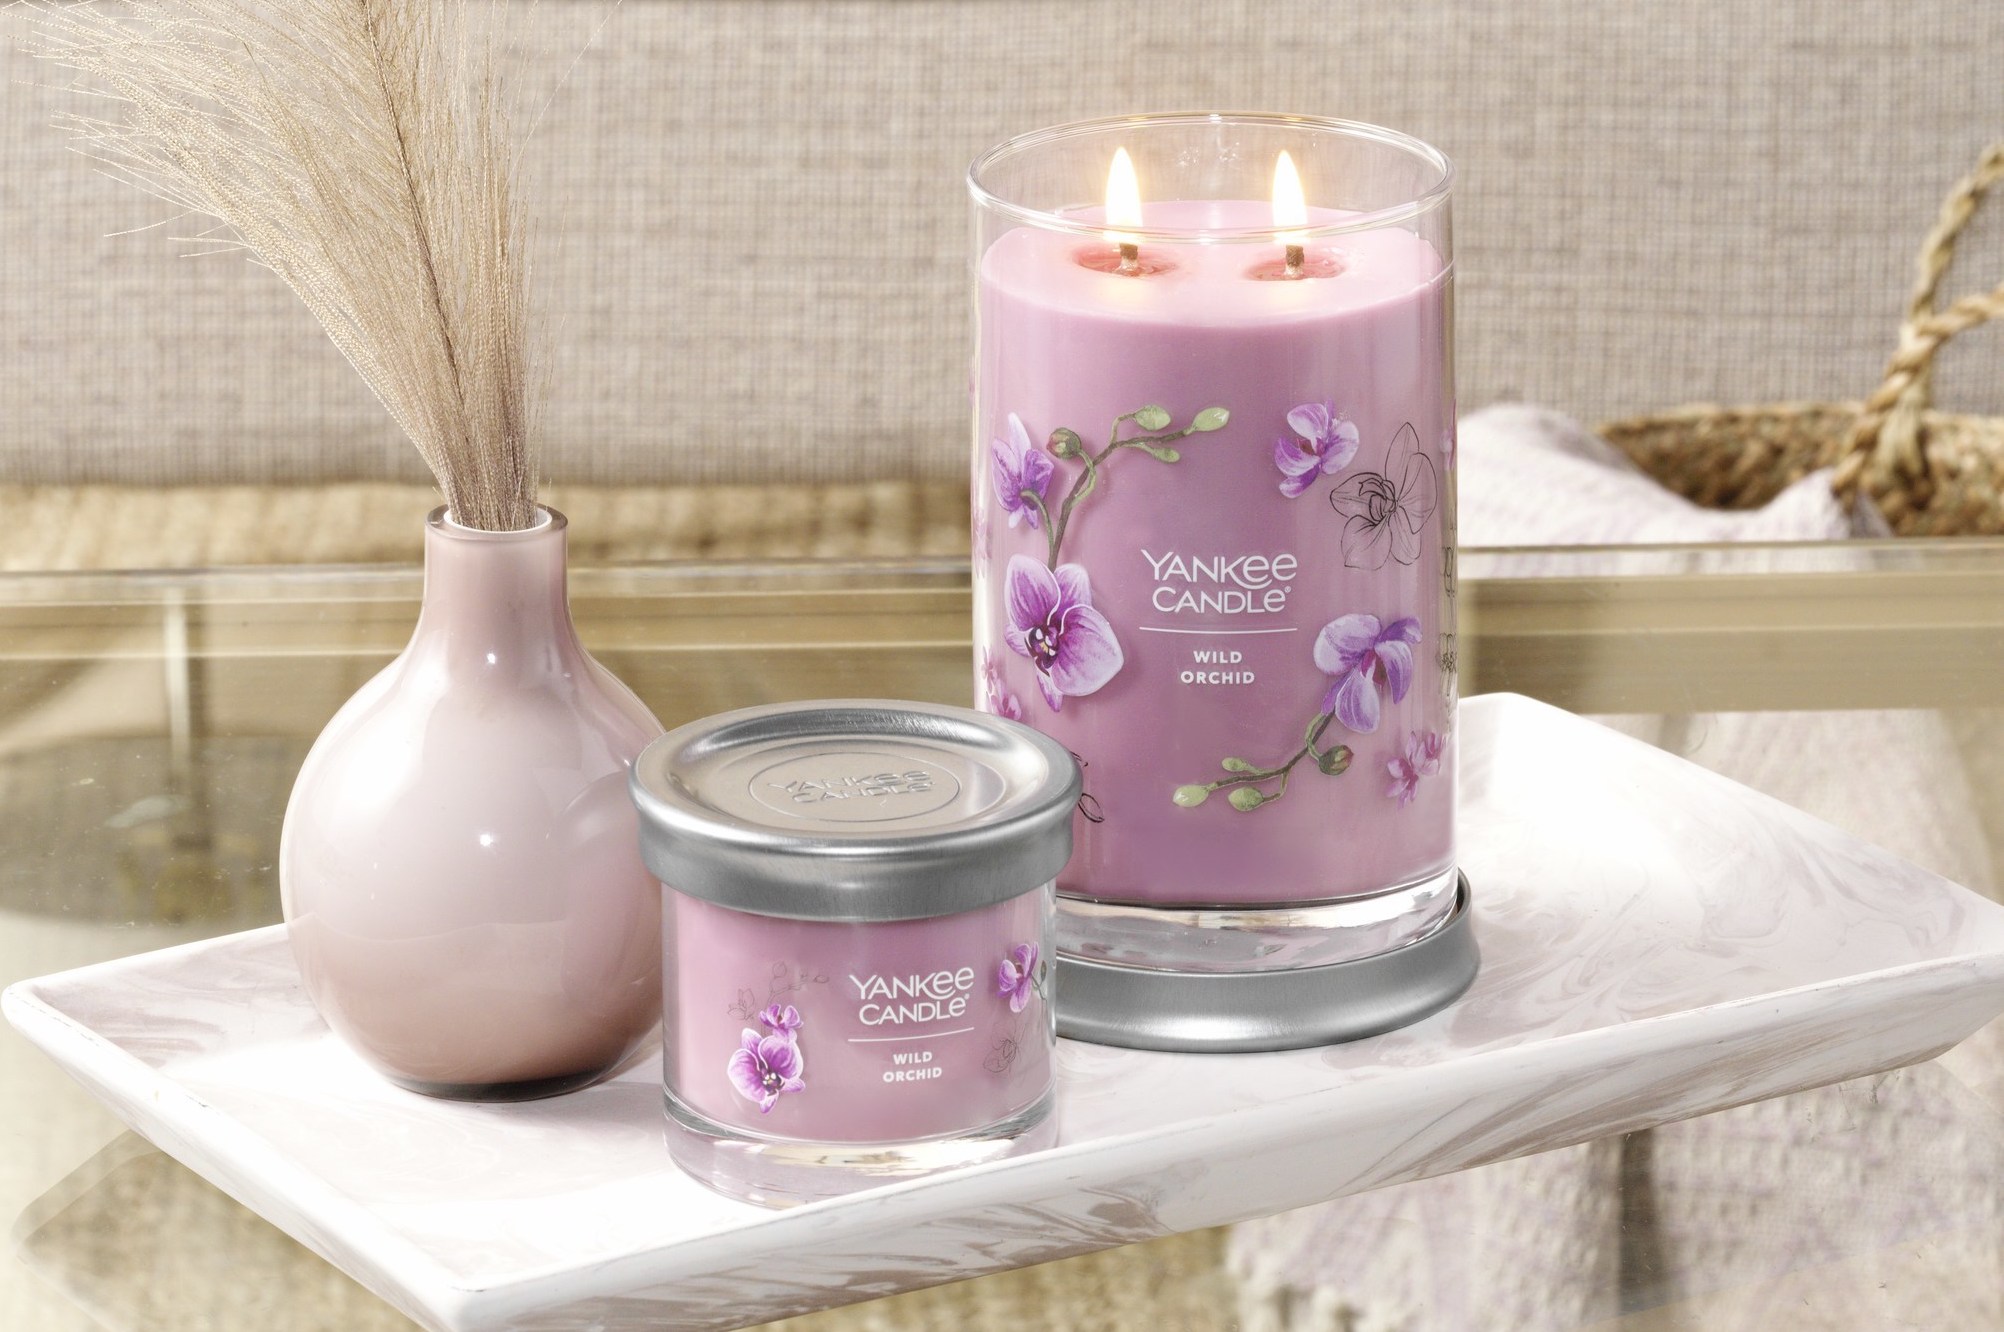 Yankee Candle unveils new 'Signature Collection' that includes 10 new  scents 